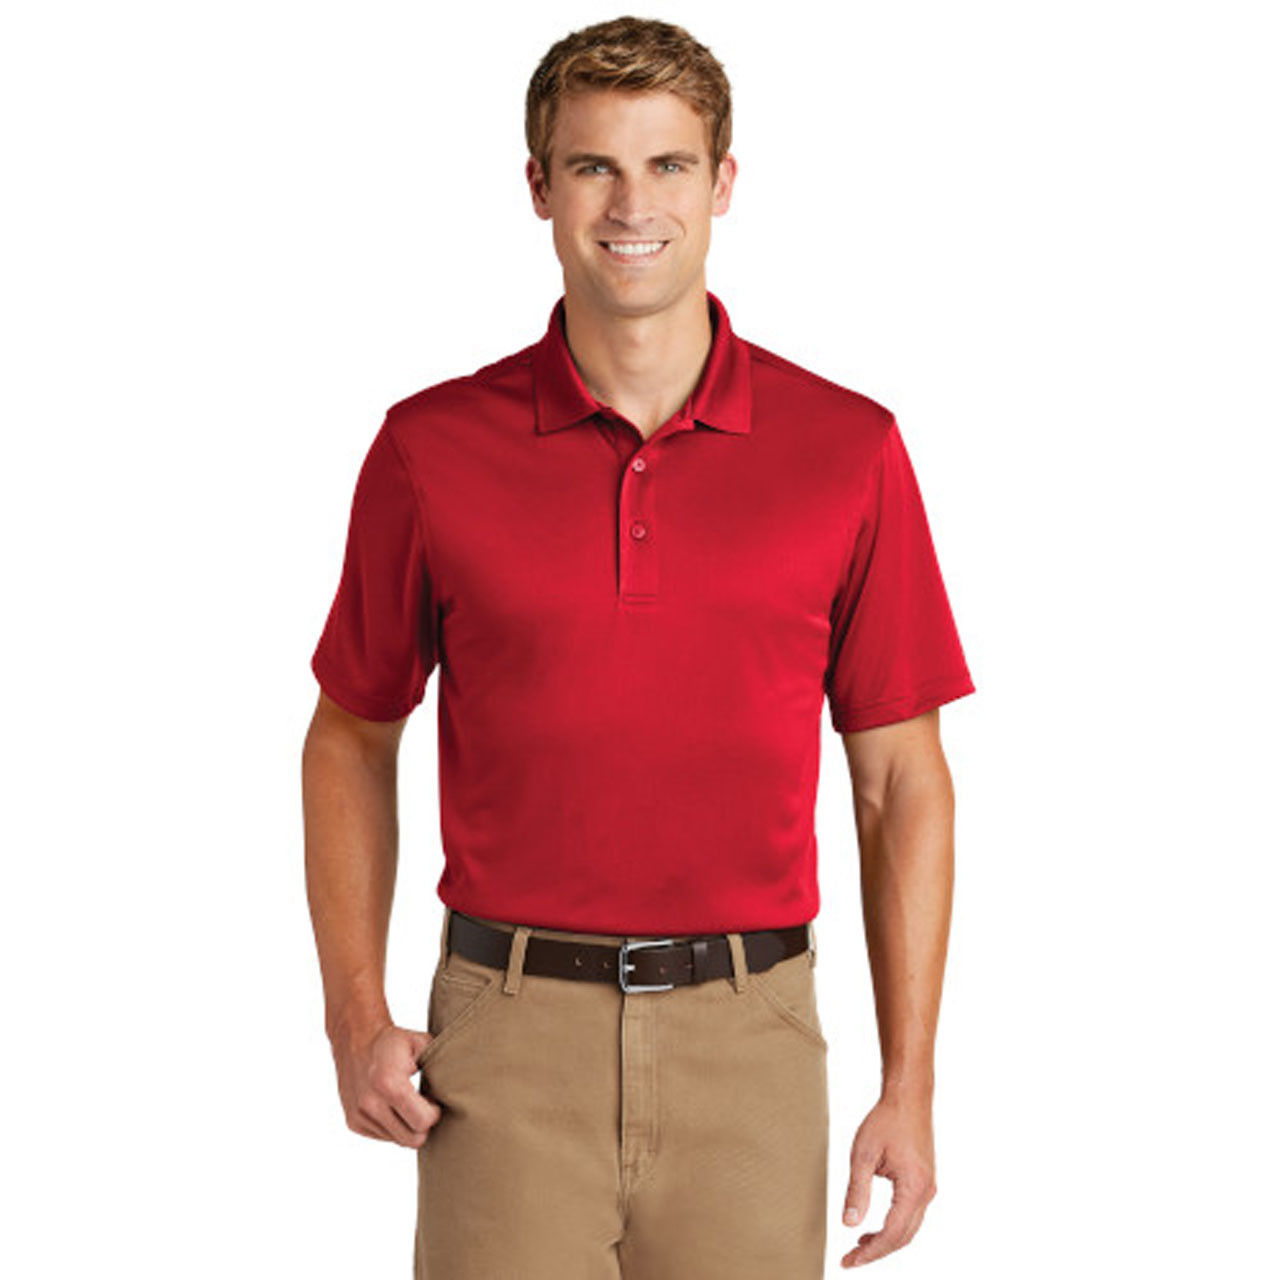 What are the features of American wholesale polo s in men's red?